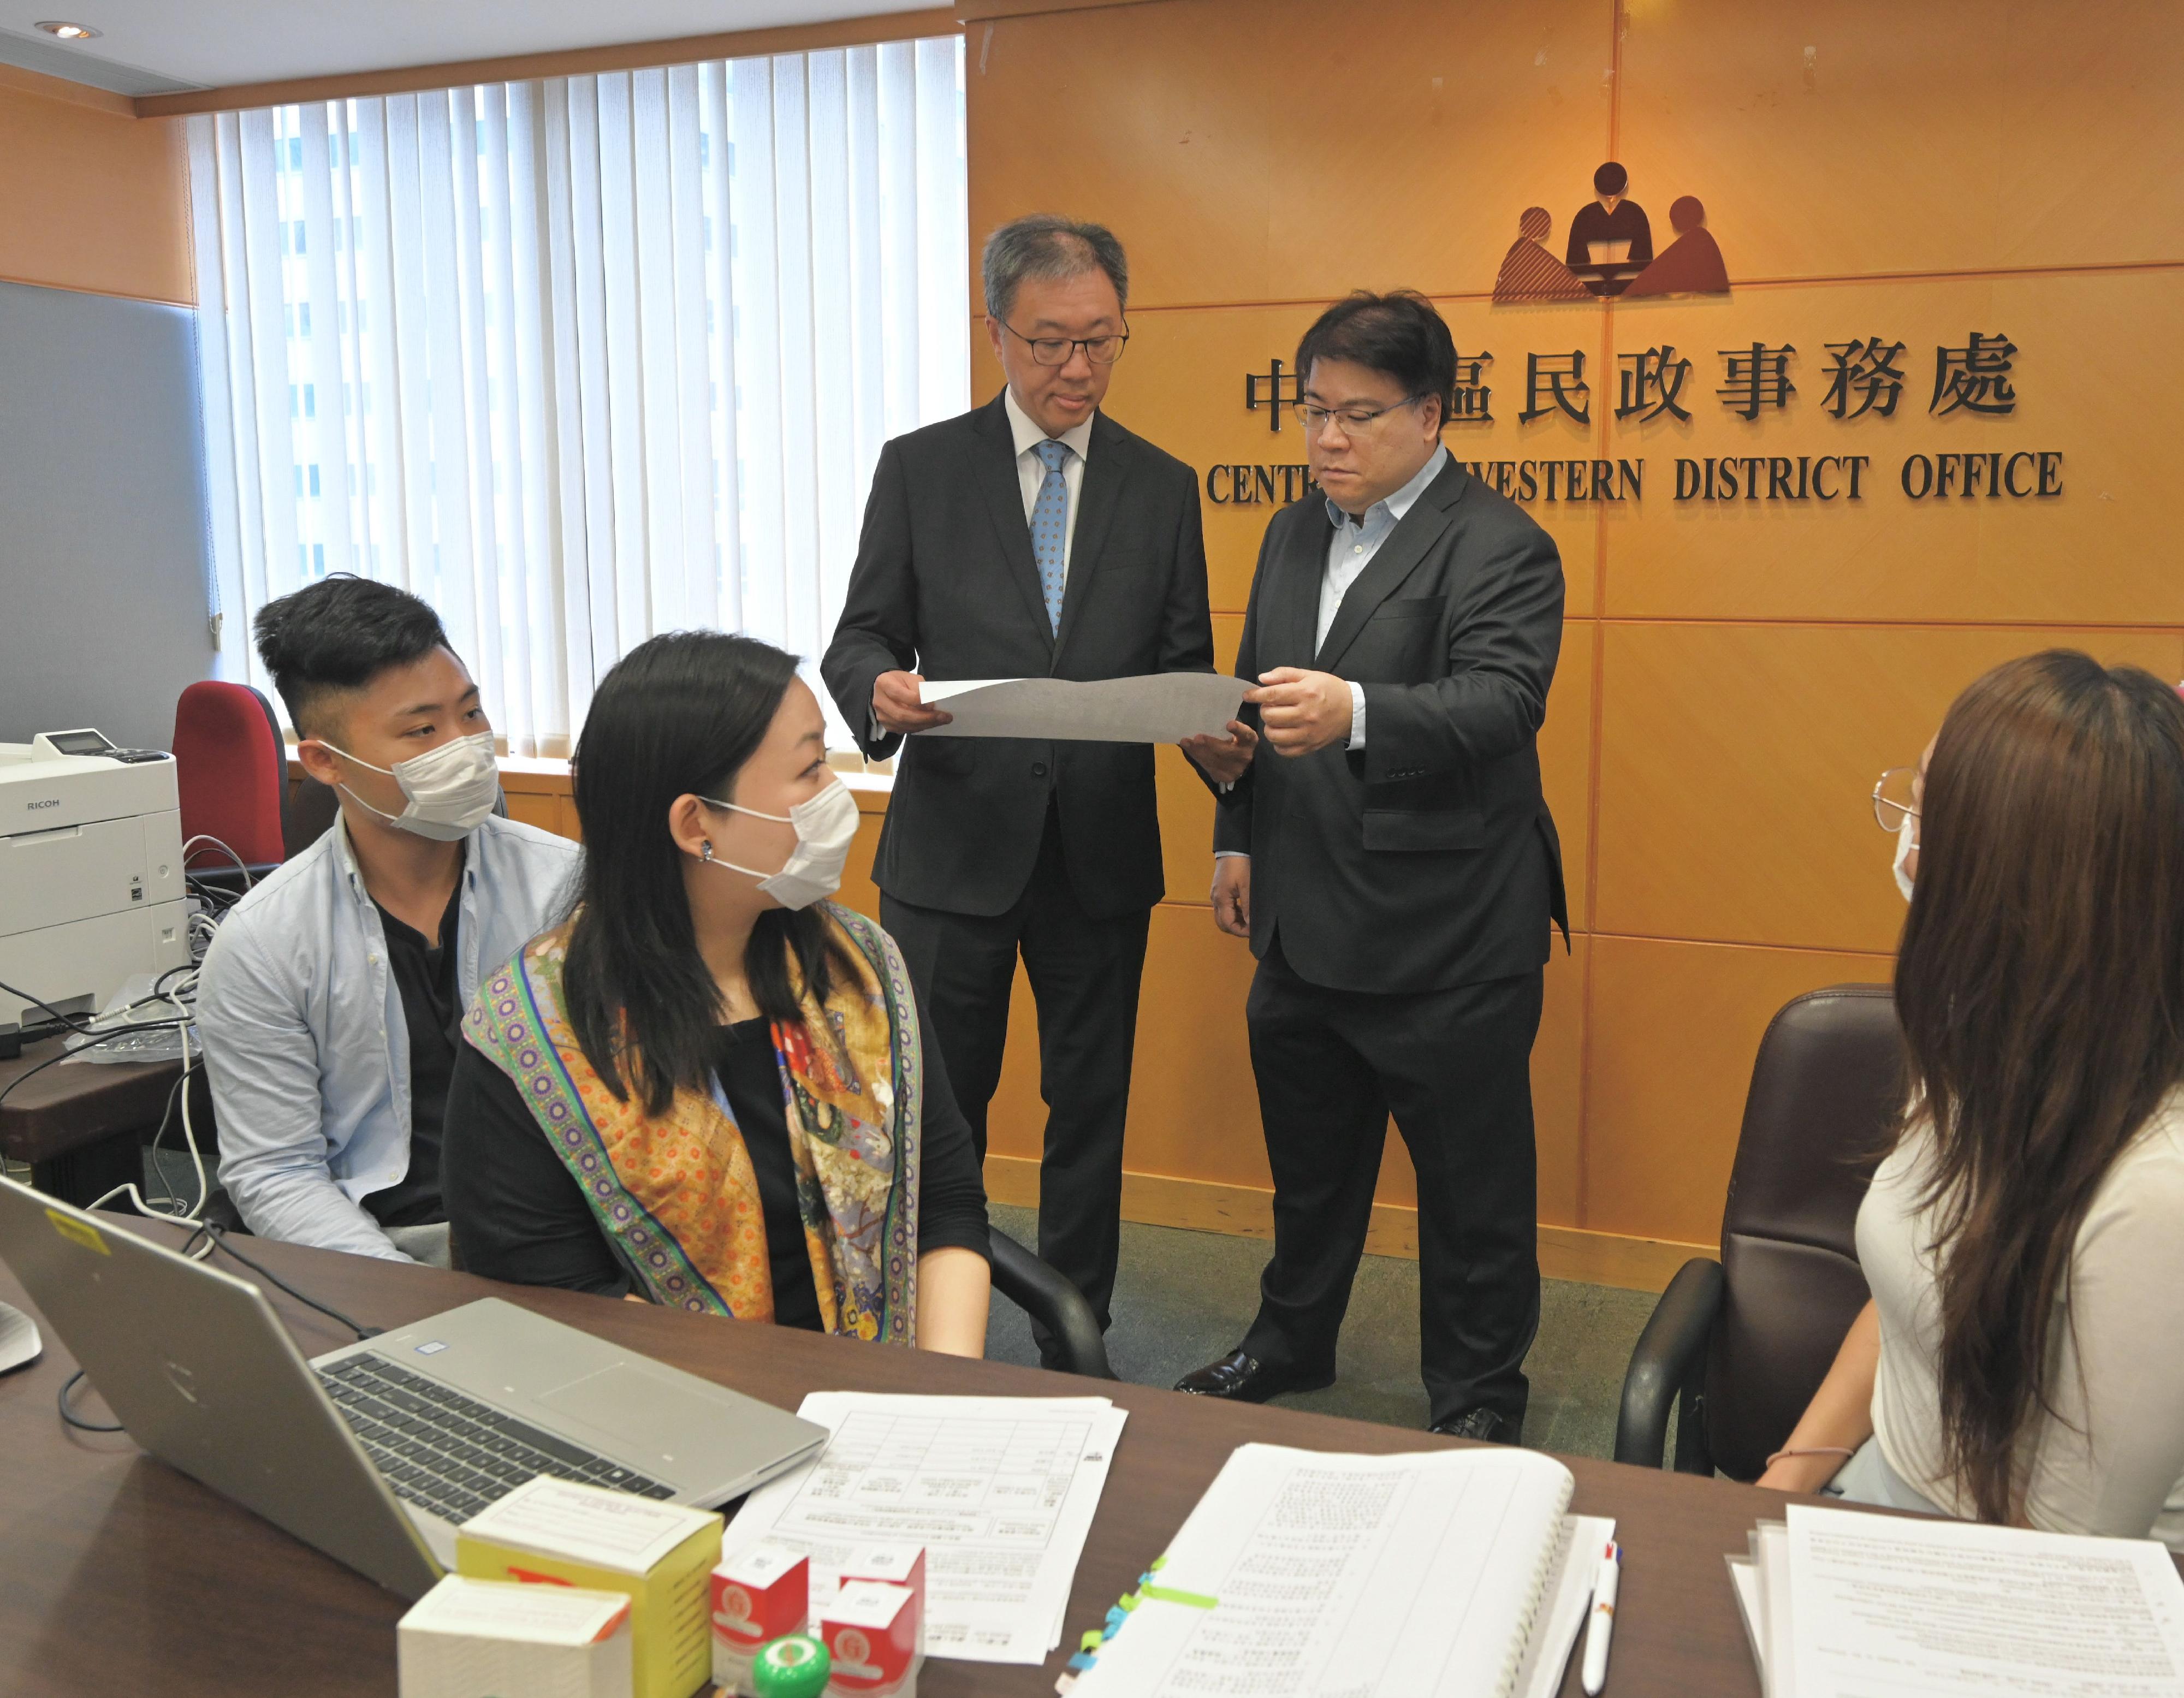 The Chairman of the Election Affairs Commission, Mr Justice David Lok (standing, left), today (October 16) visits the Returning Officer's office at the Central and Western District Office, where nomination forms for the 2023 District Council Ordinary Election will be received, to inspect the procedures for receiving nomination forms. Also present is the Returning Officer of the Central and Western District, Mr David Leung (standing, right).